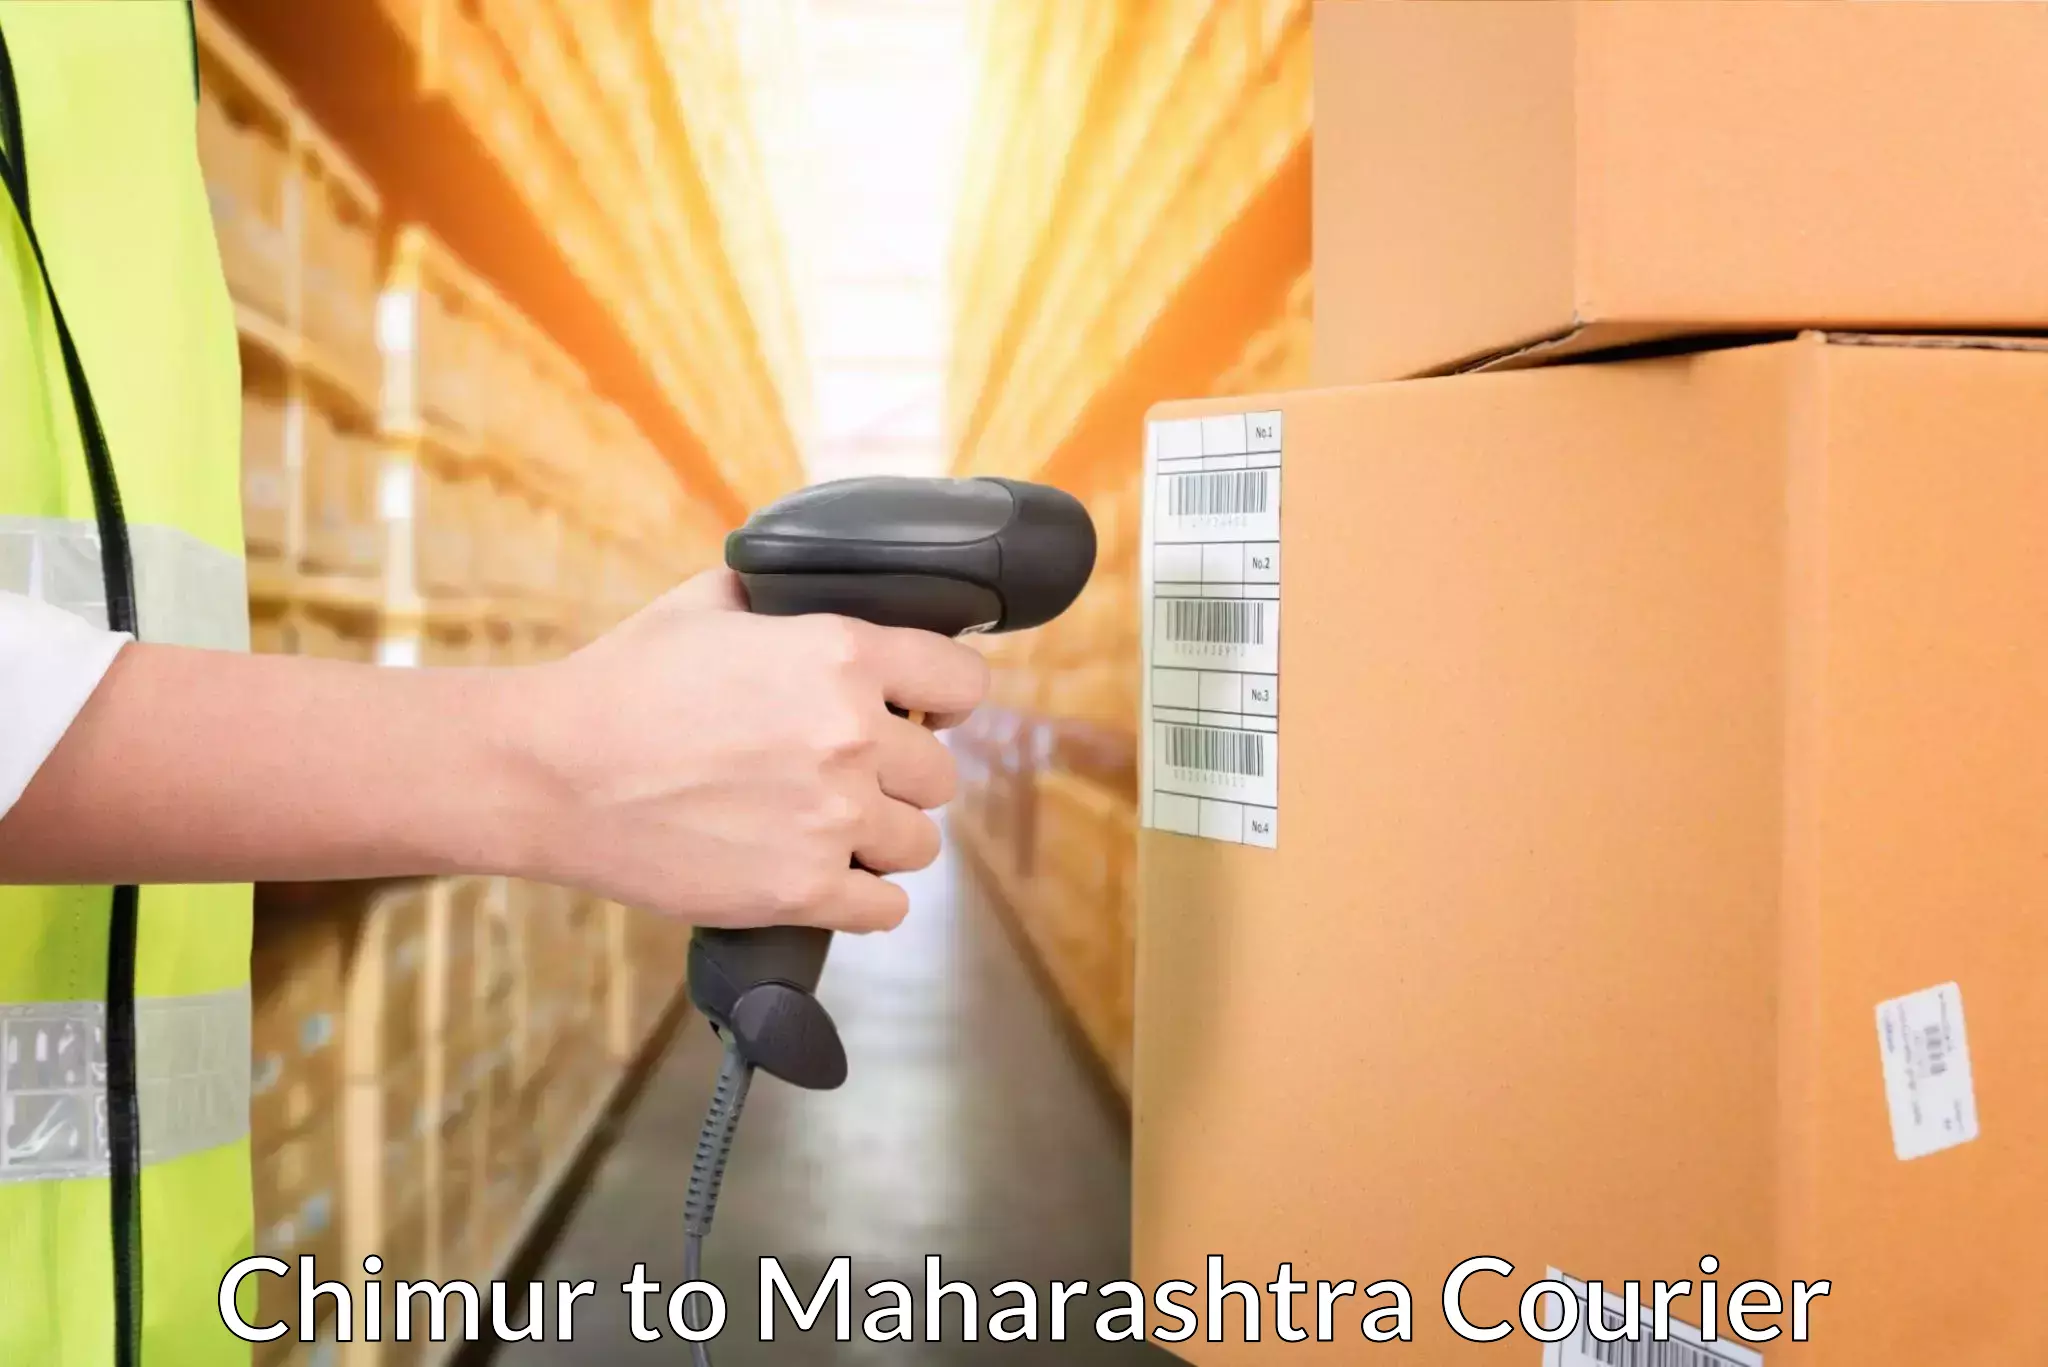 On-call courier service Chimur to Gadchandur